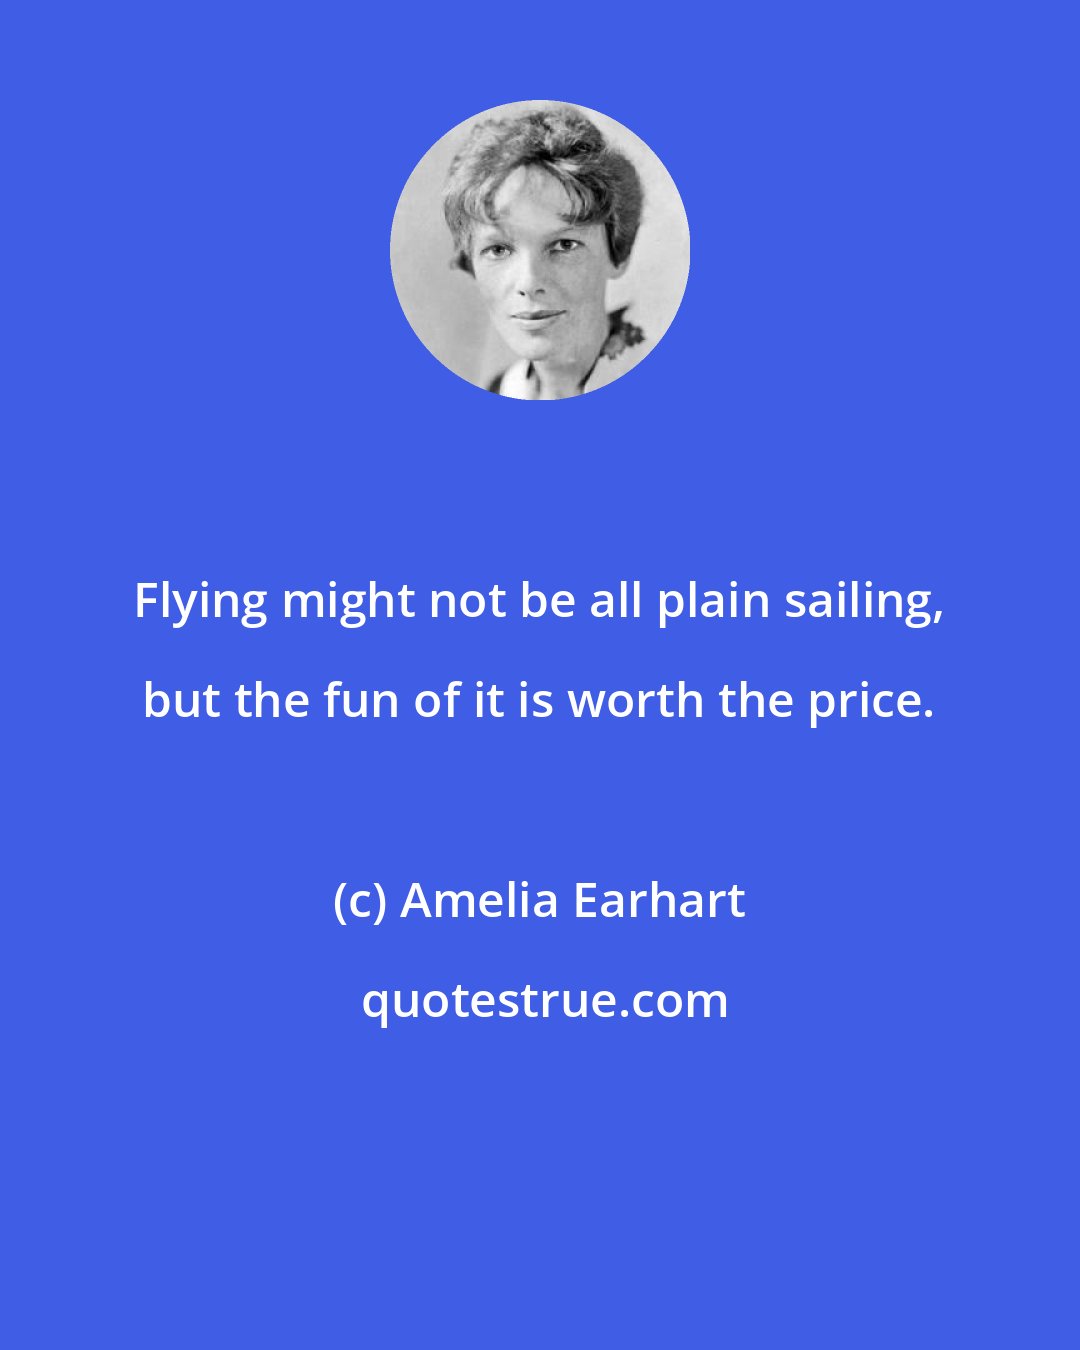 Amelia Earhart: Flying might not be all plain sailing, but the fun of it is worth the price.